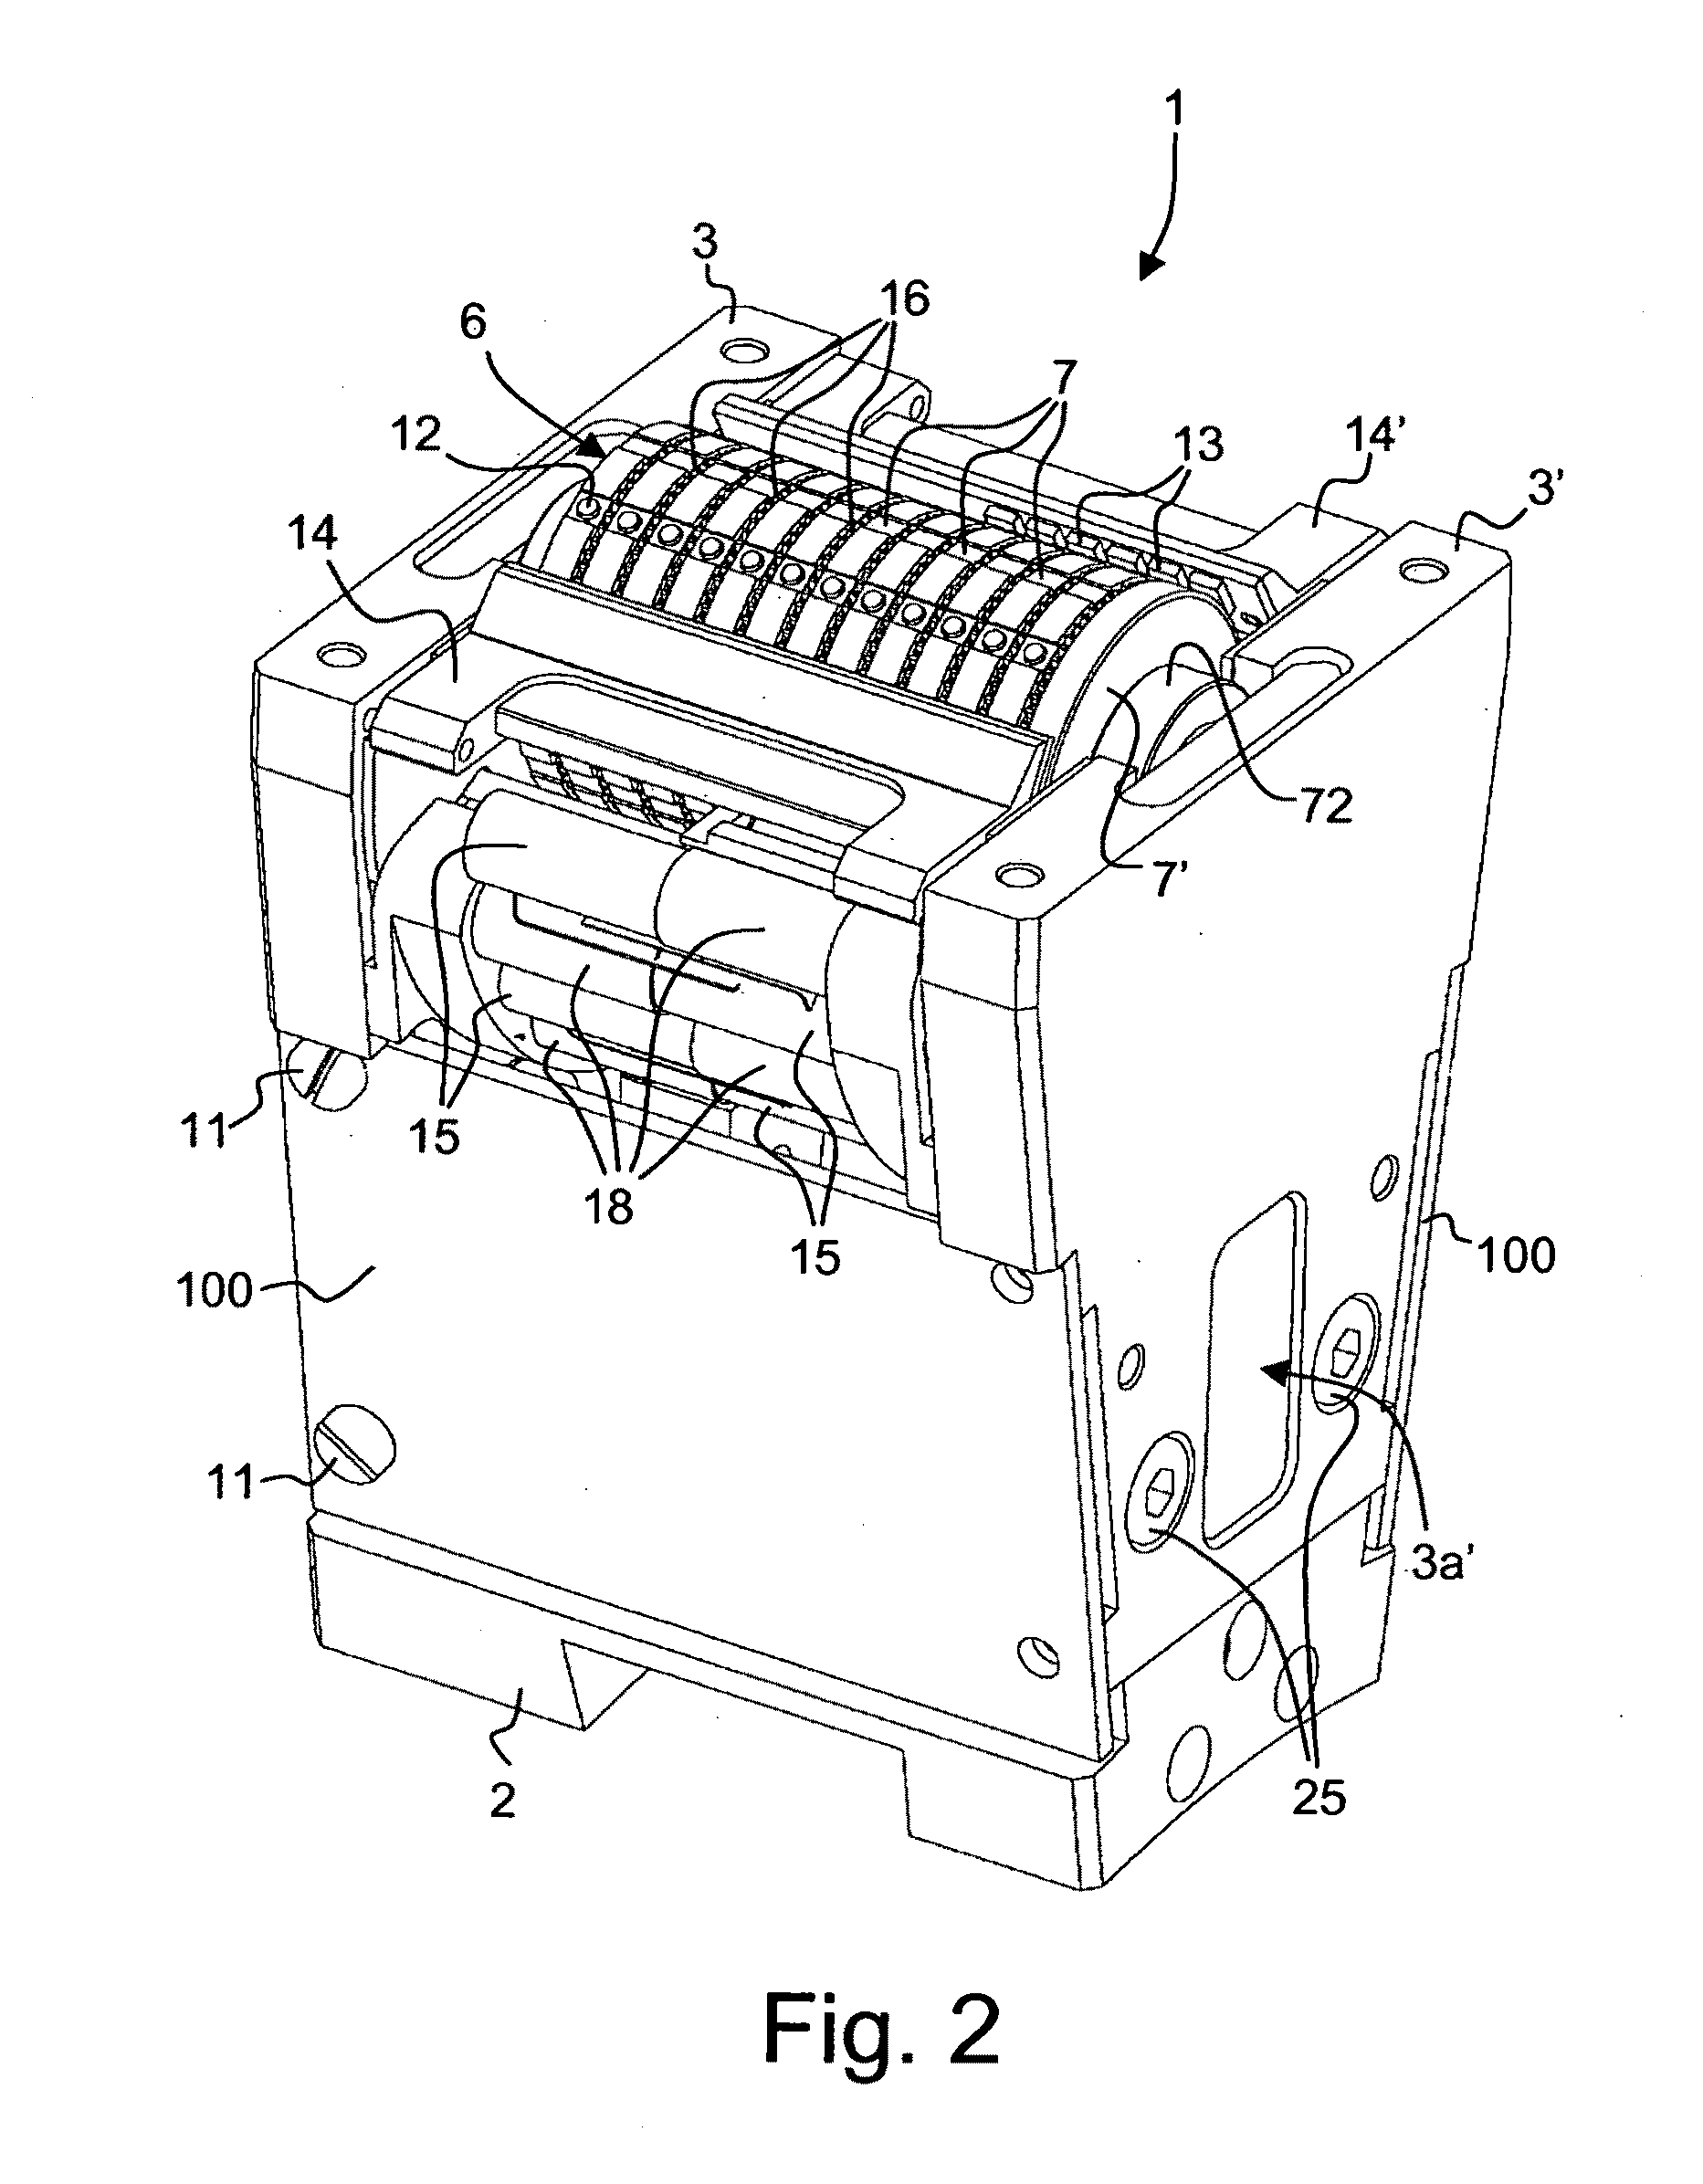 Method and device for controlling the position of the numbering wheels of a numbering device